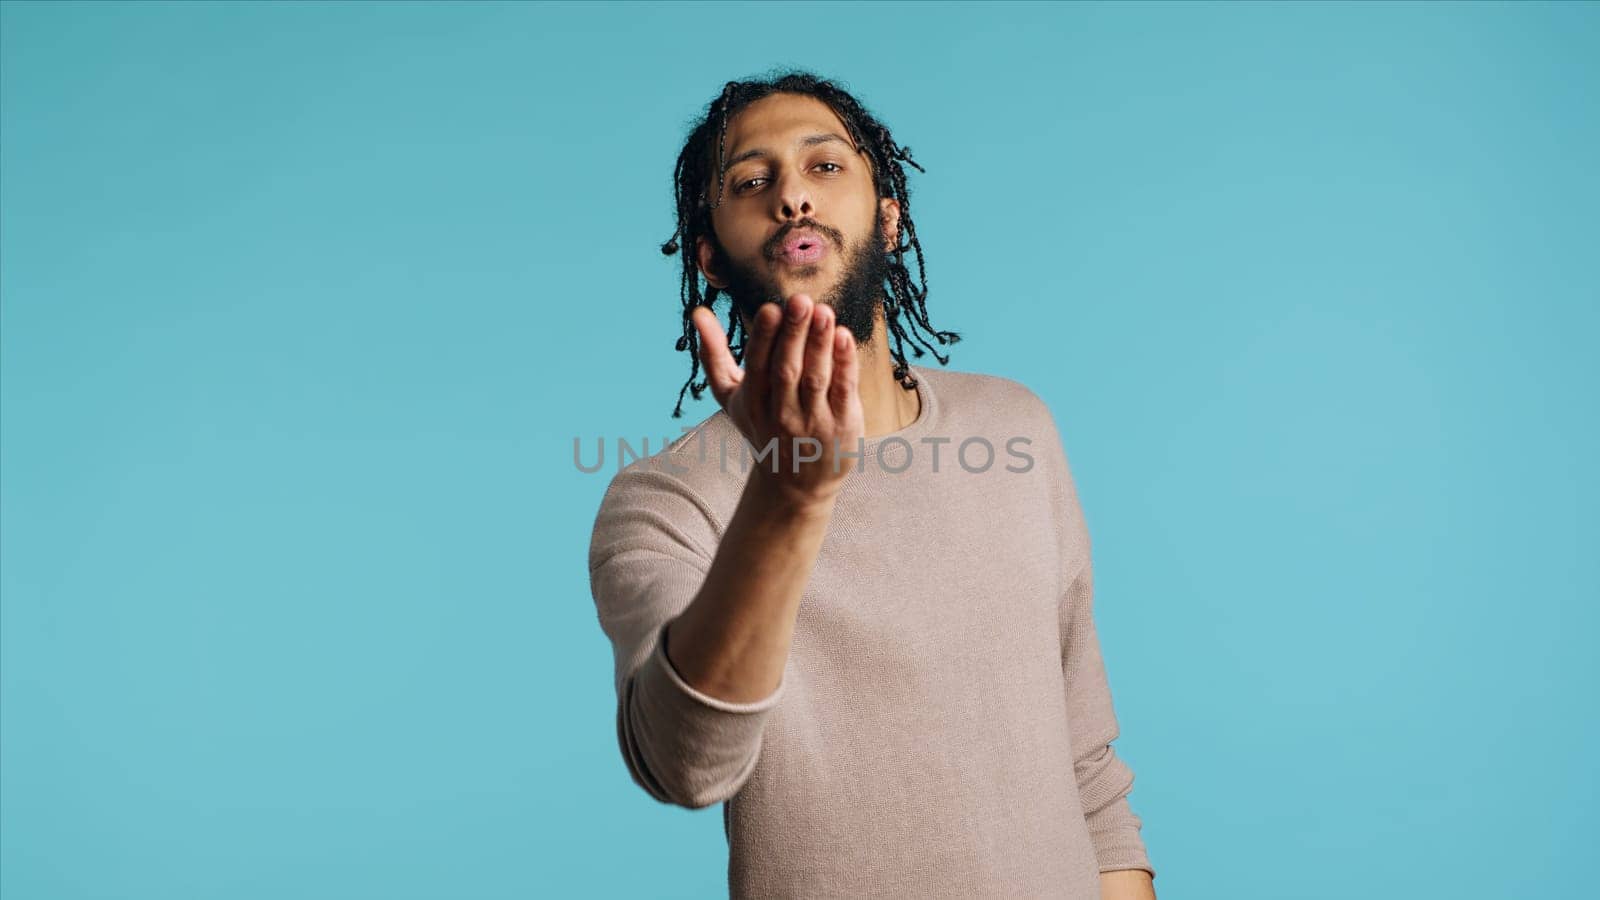 Man blowing kisses to camera, being flirty, studio background by DCStudio